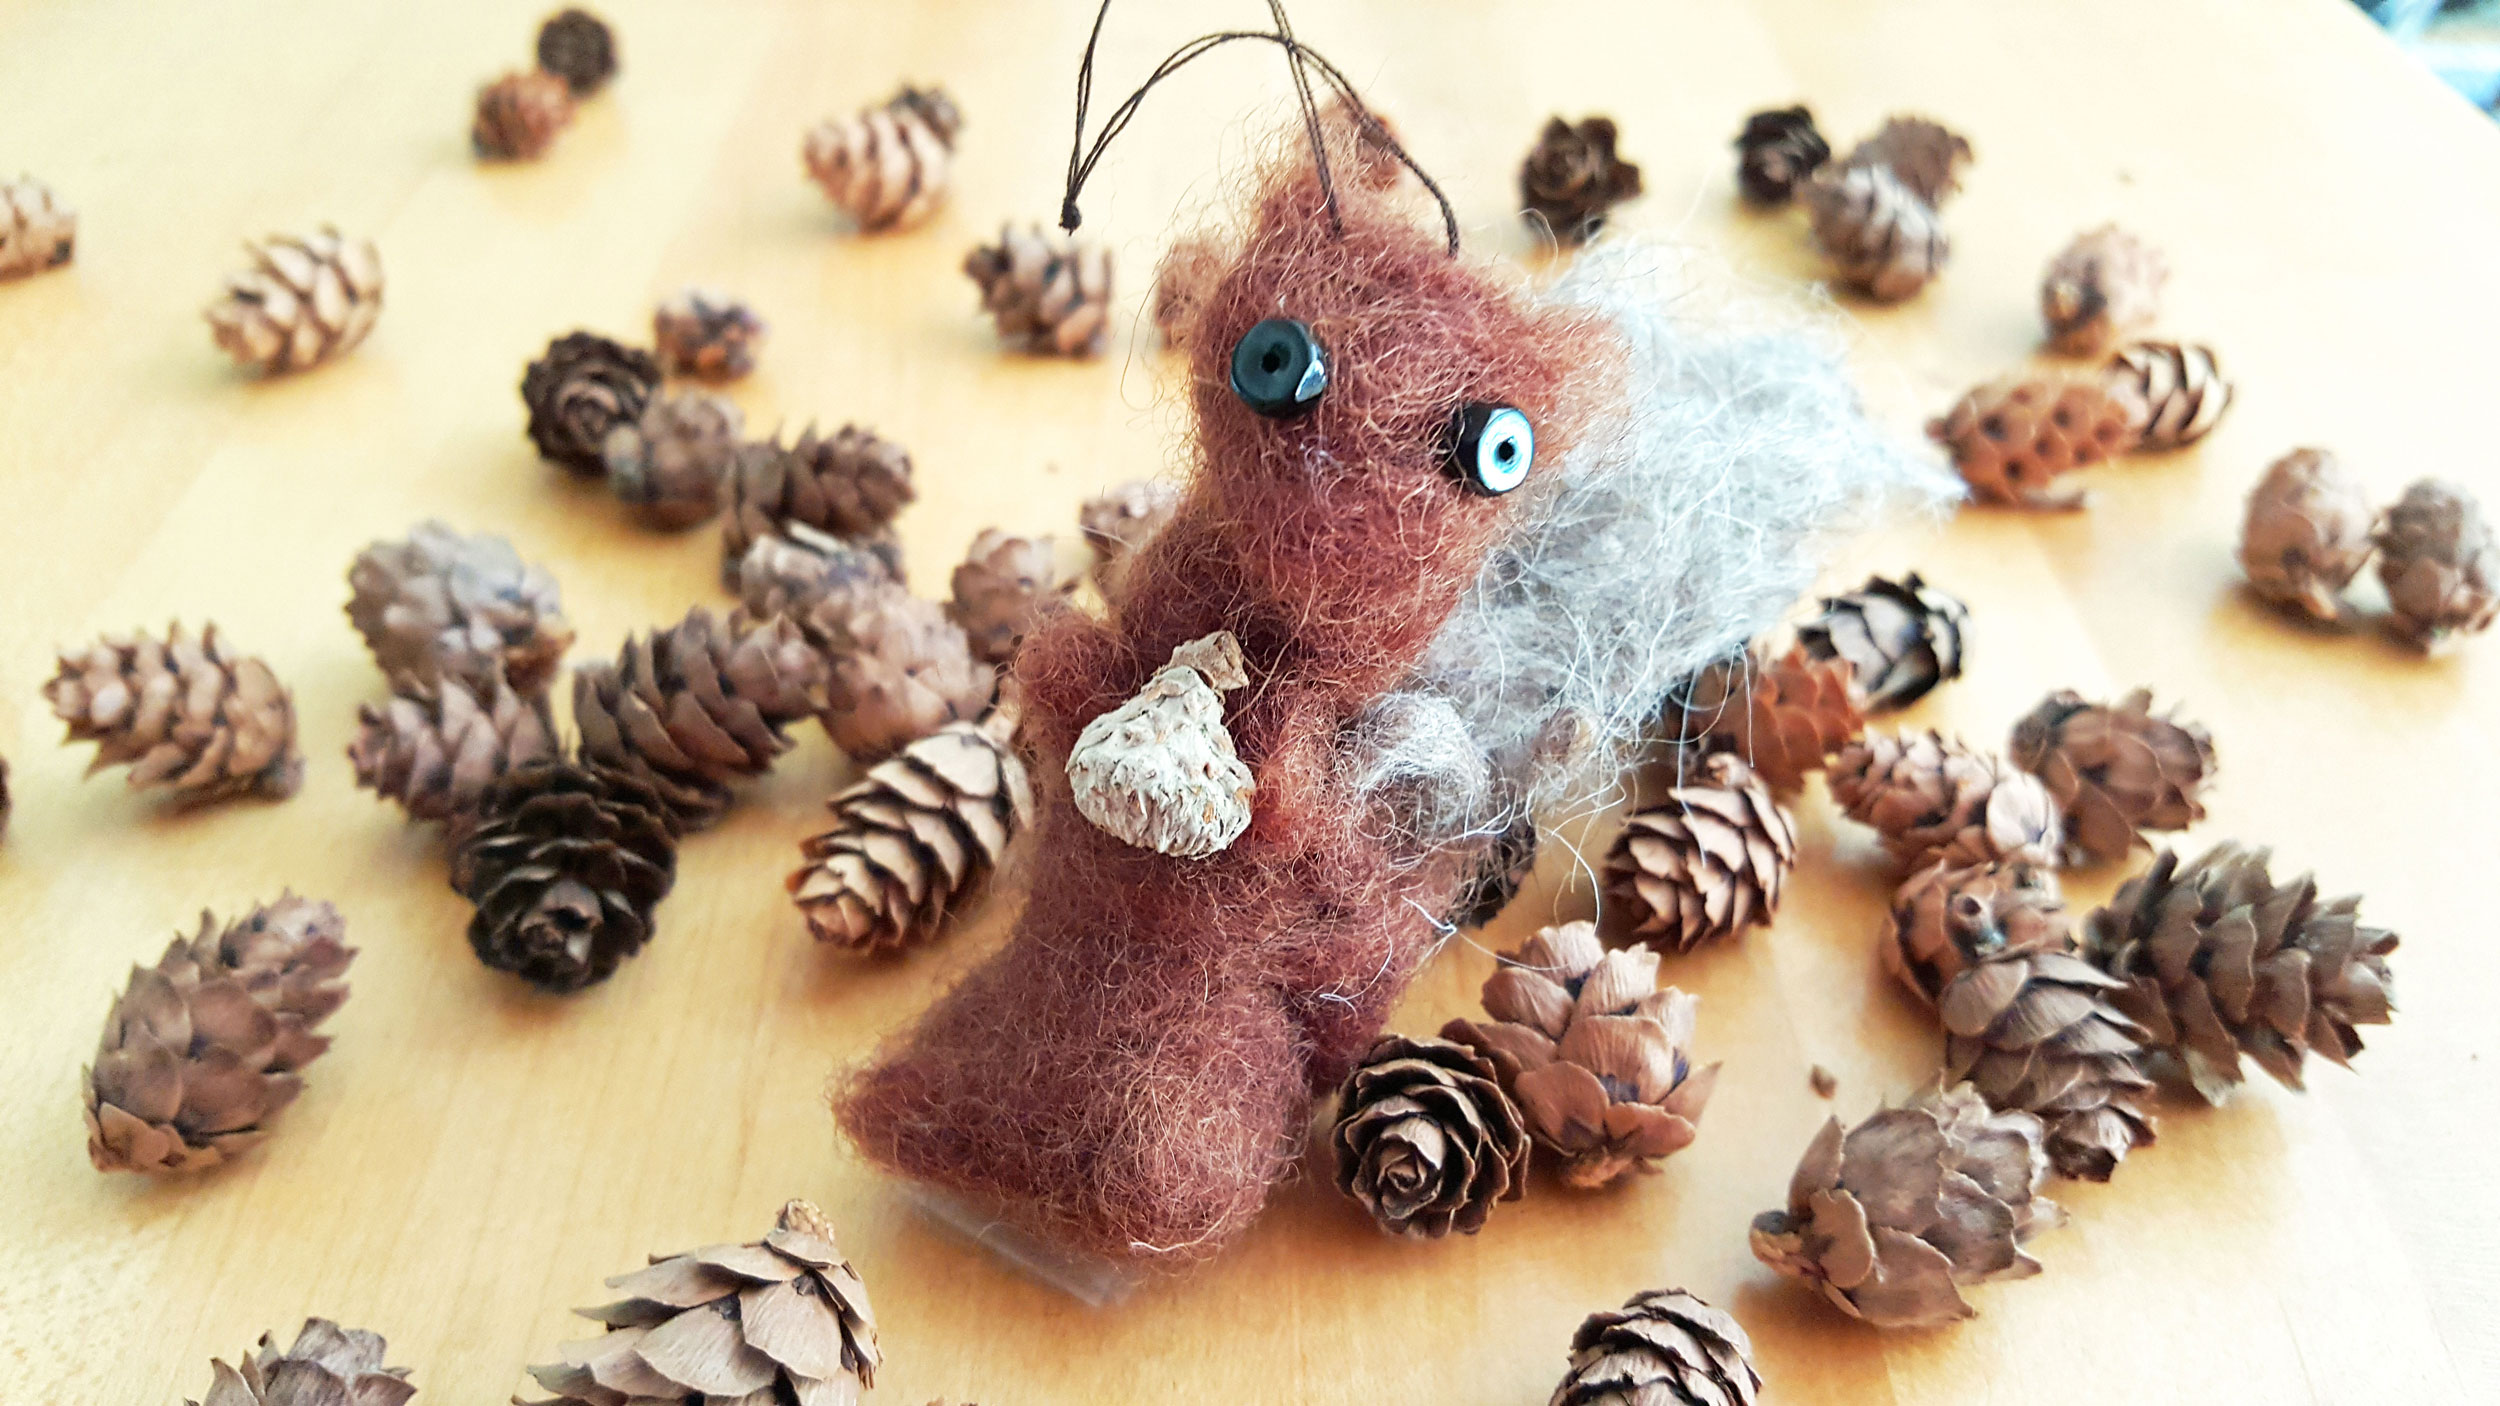 the final DIY squirrel felted ornament surrounded by little acorns. | OrnamnentShop.com